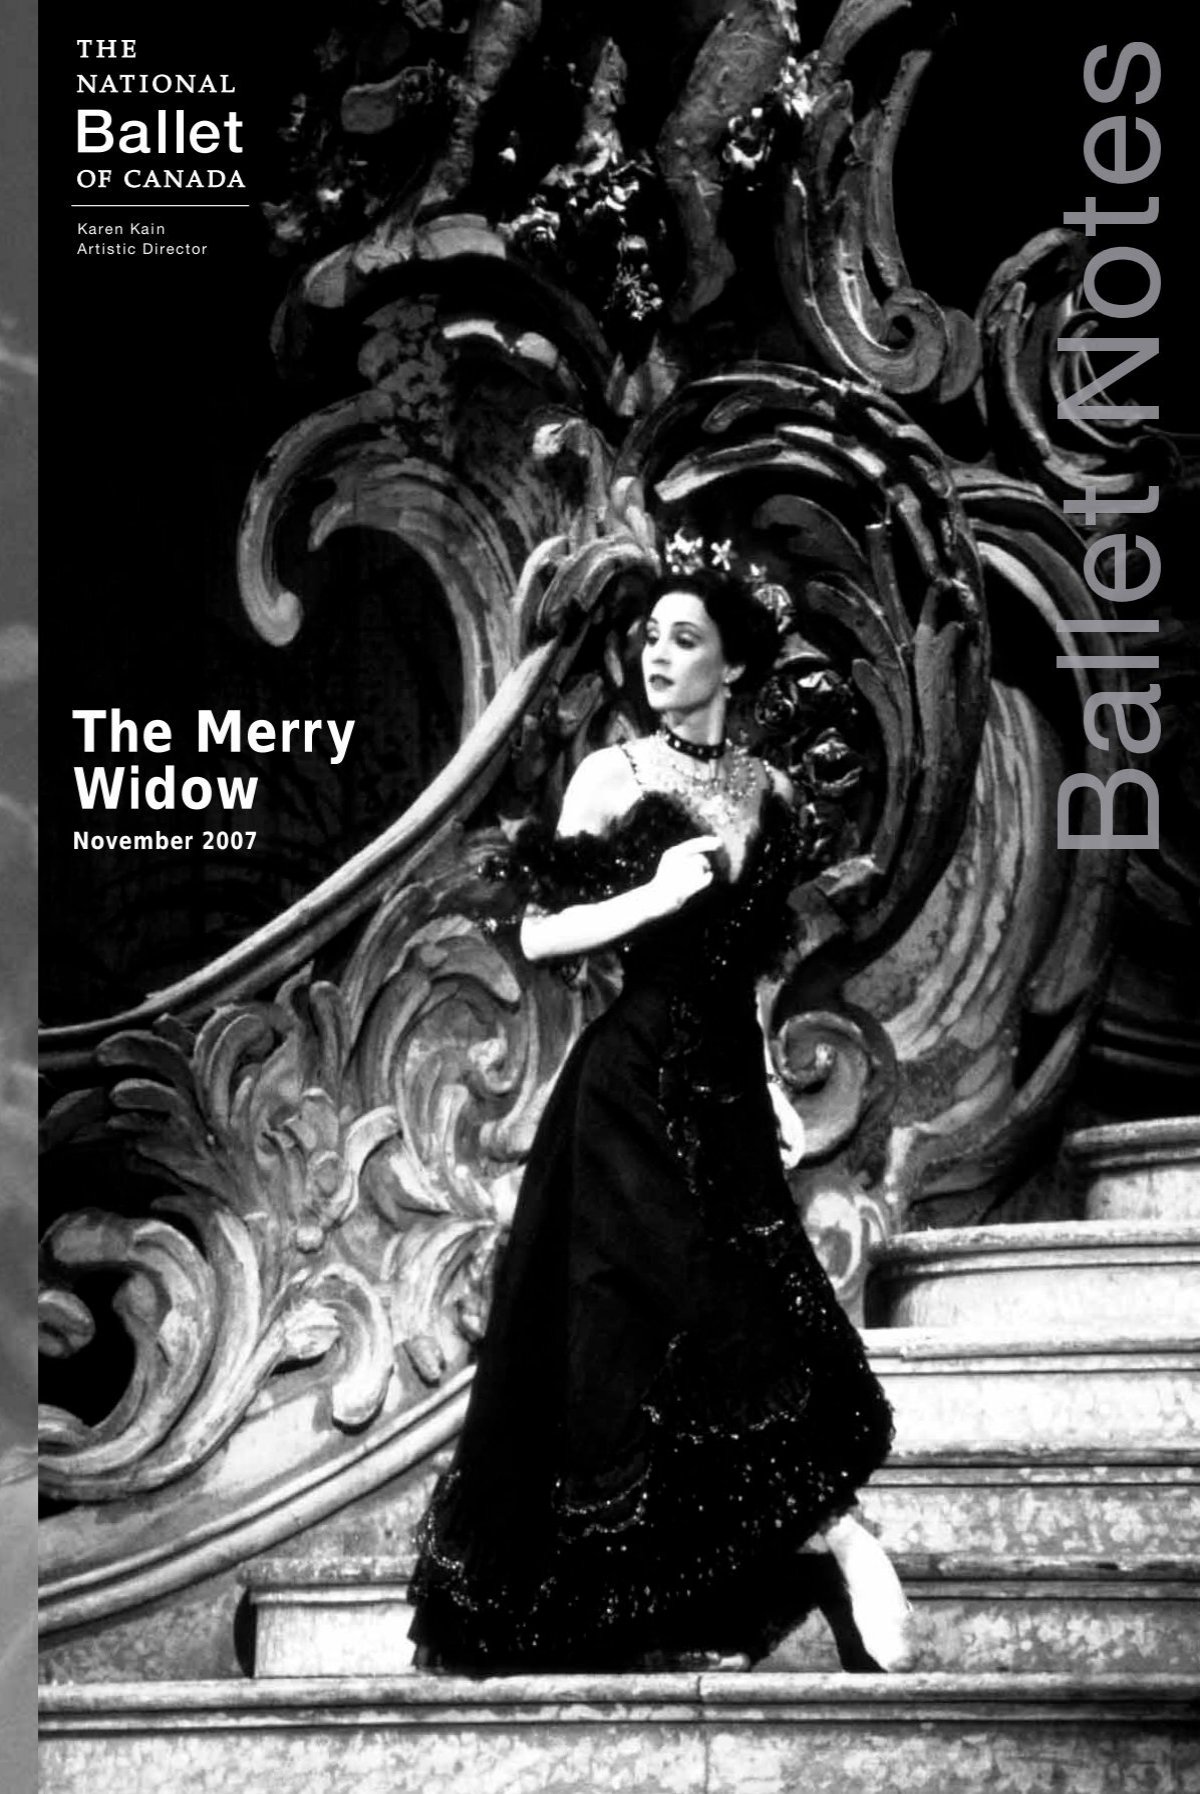 The Merry Widow 2018 The National Ballet of Canada